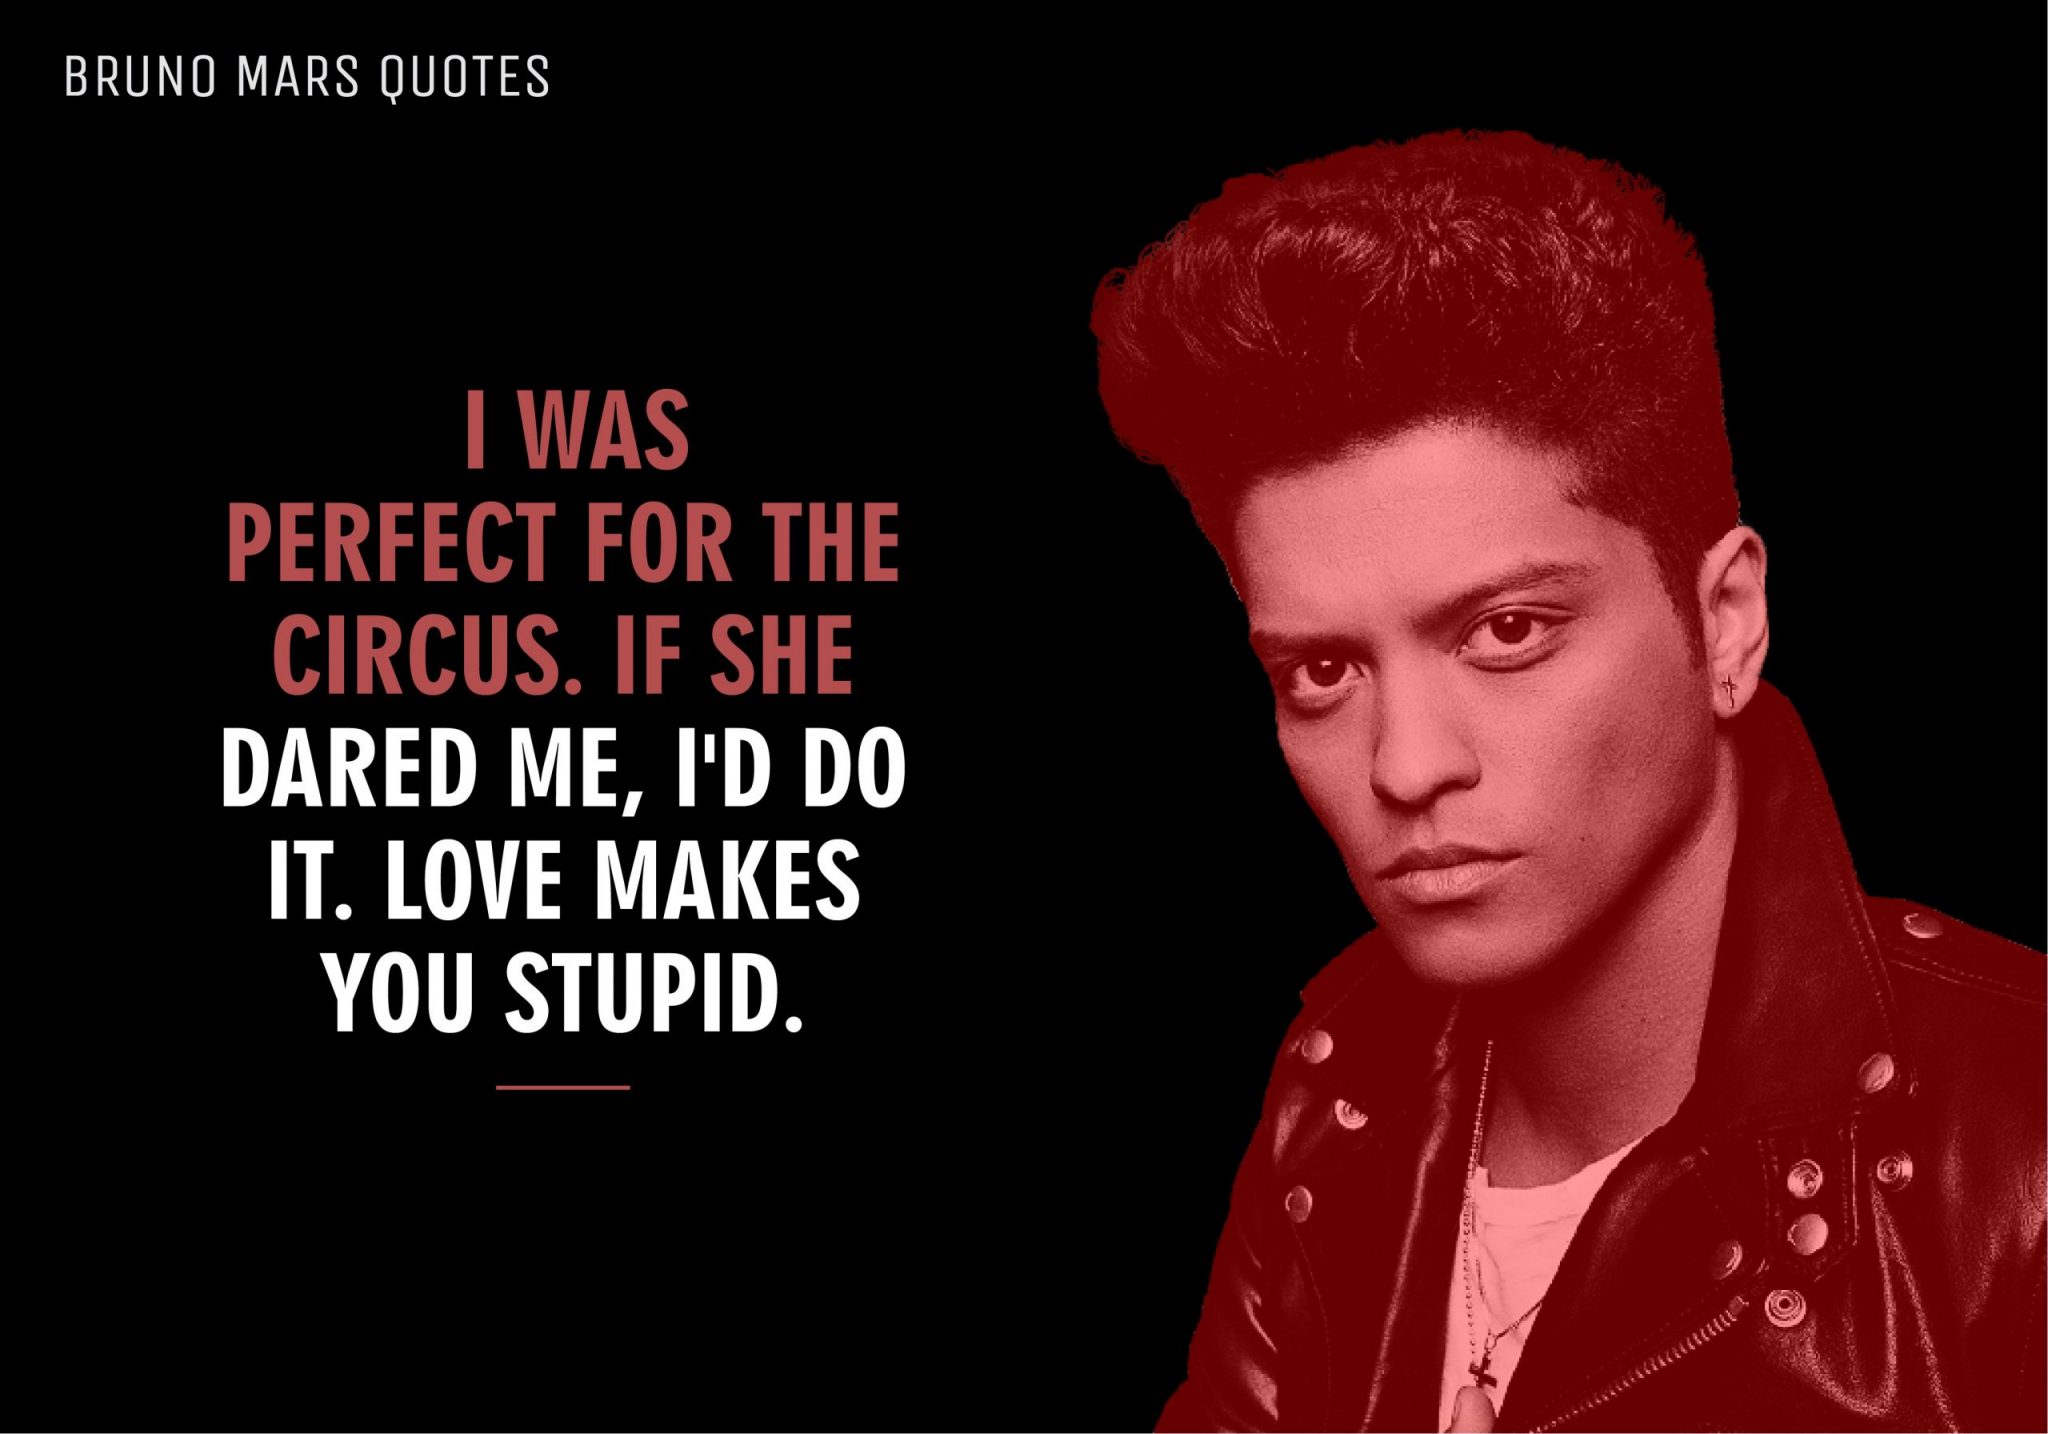 12 Best Bruno Mars Quotes That Will Make You Fall in Love EliteColumn